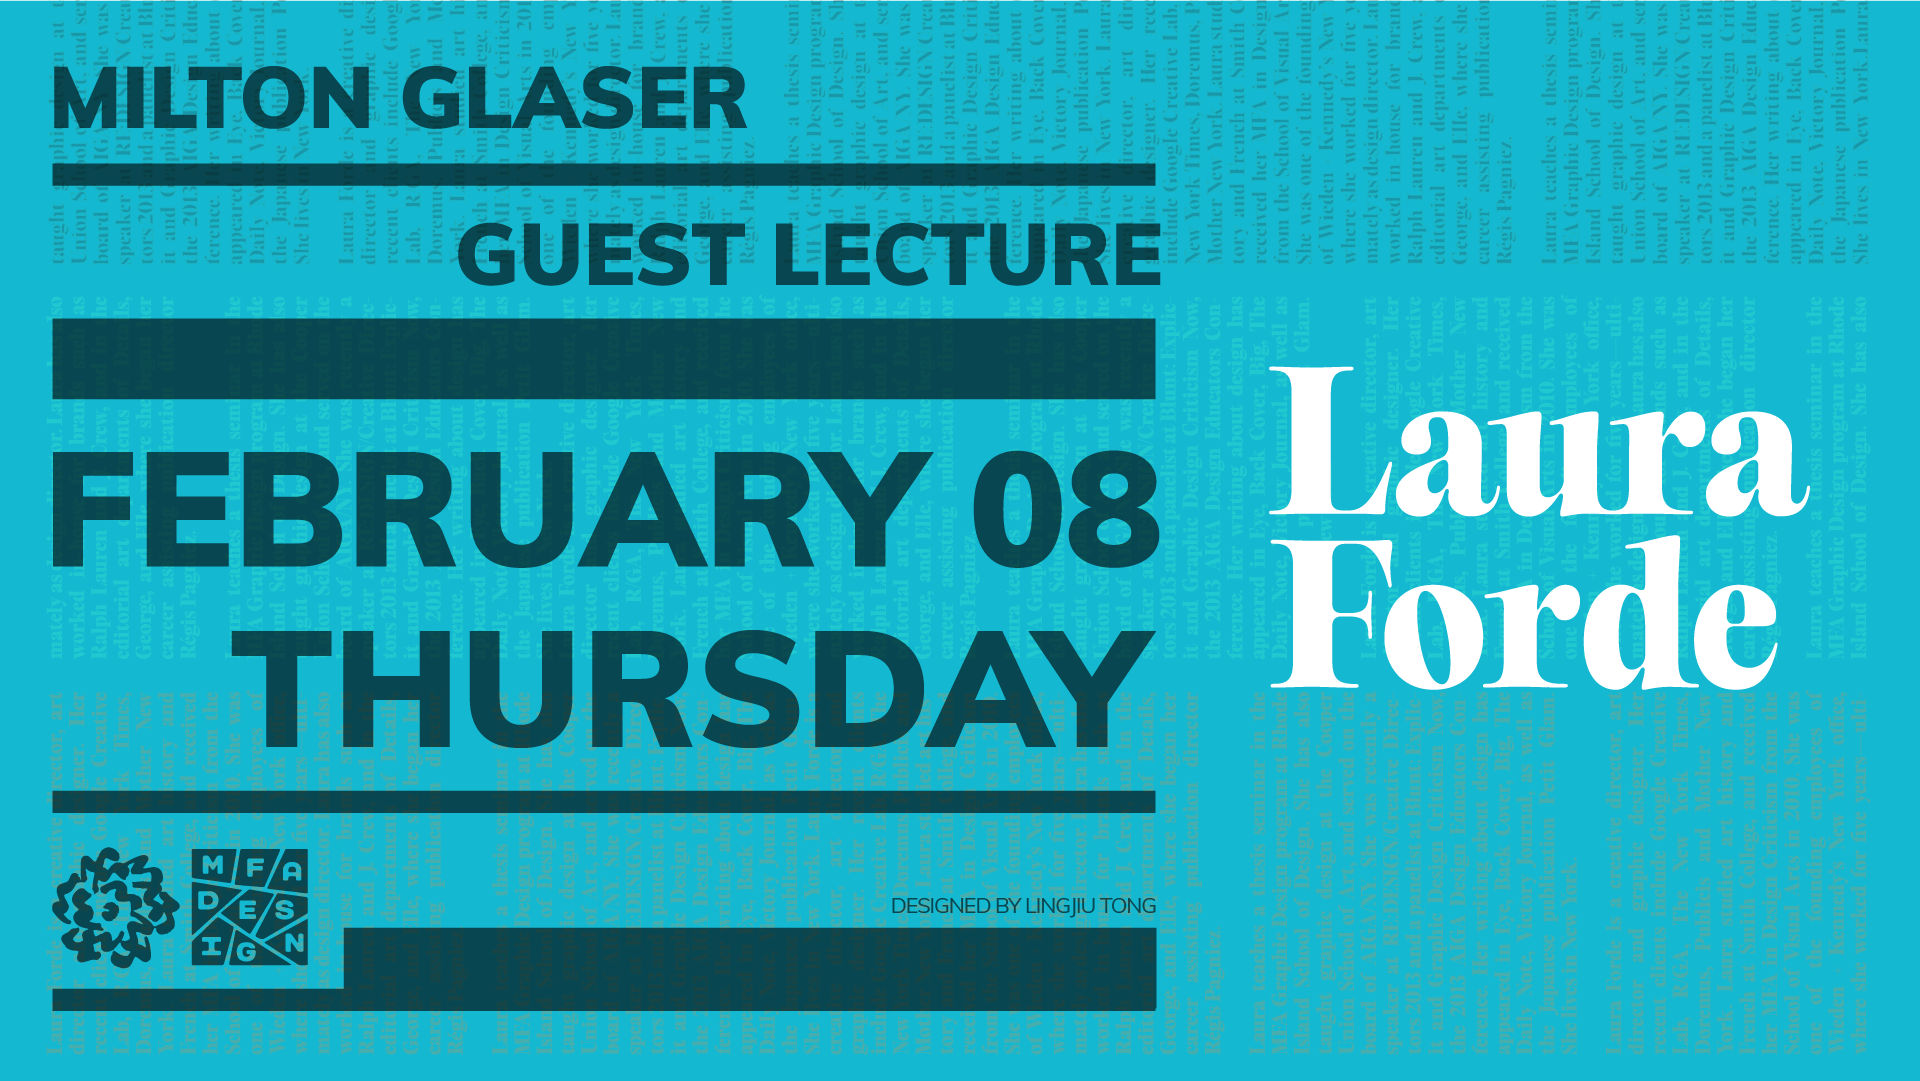 informational poster announcing guest lecturer Laura Forde